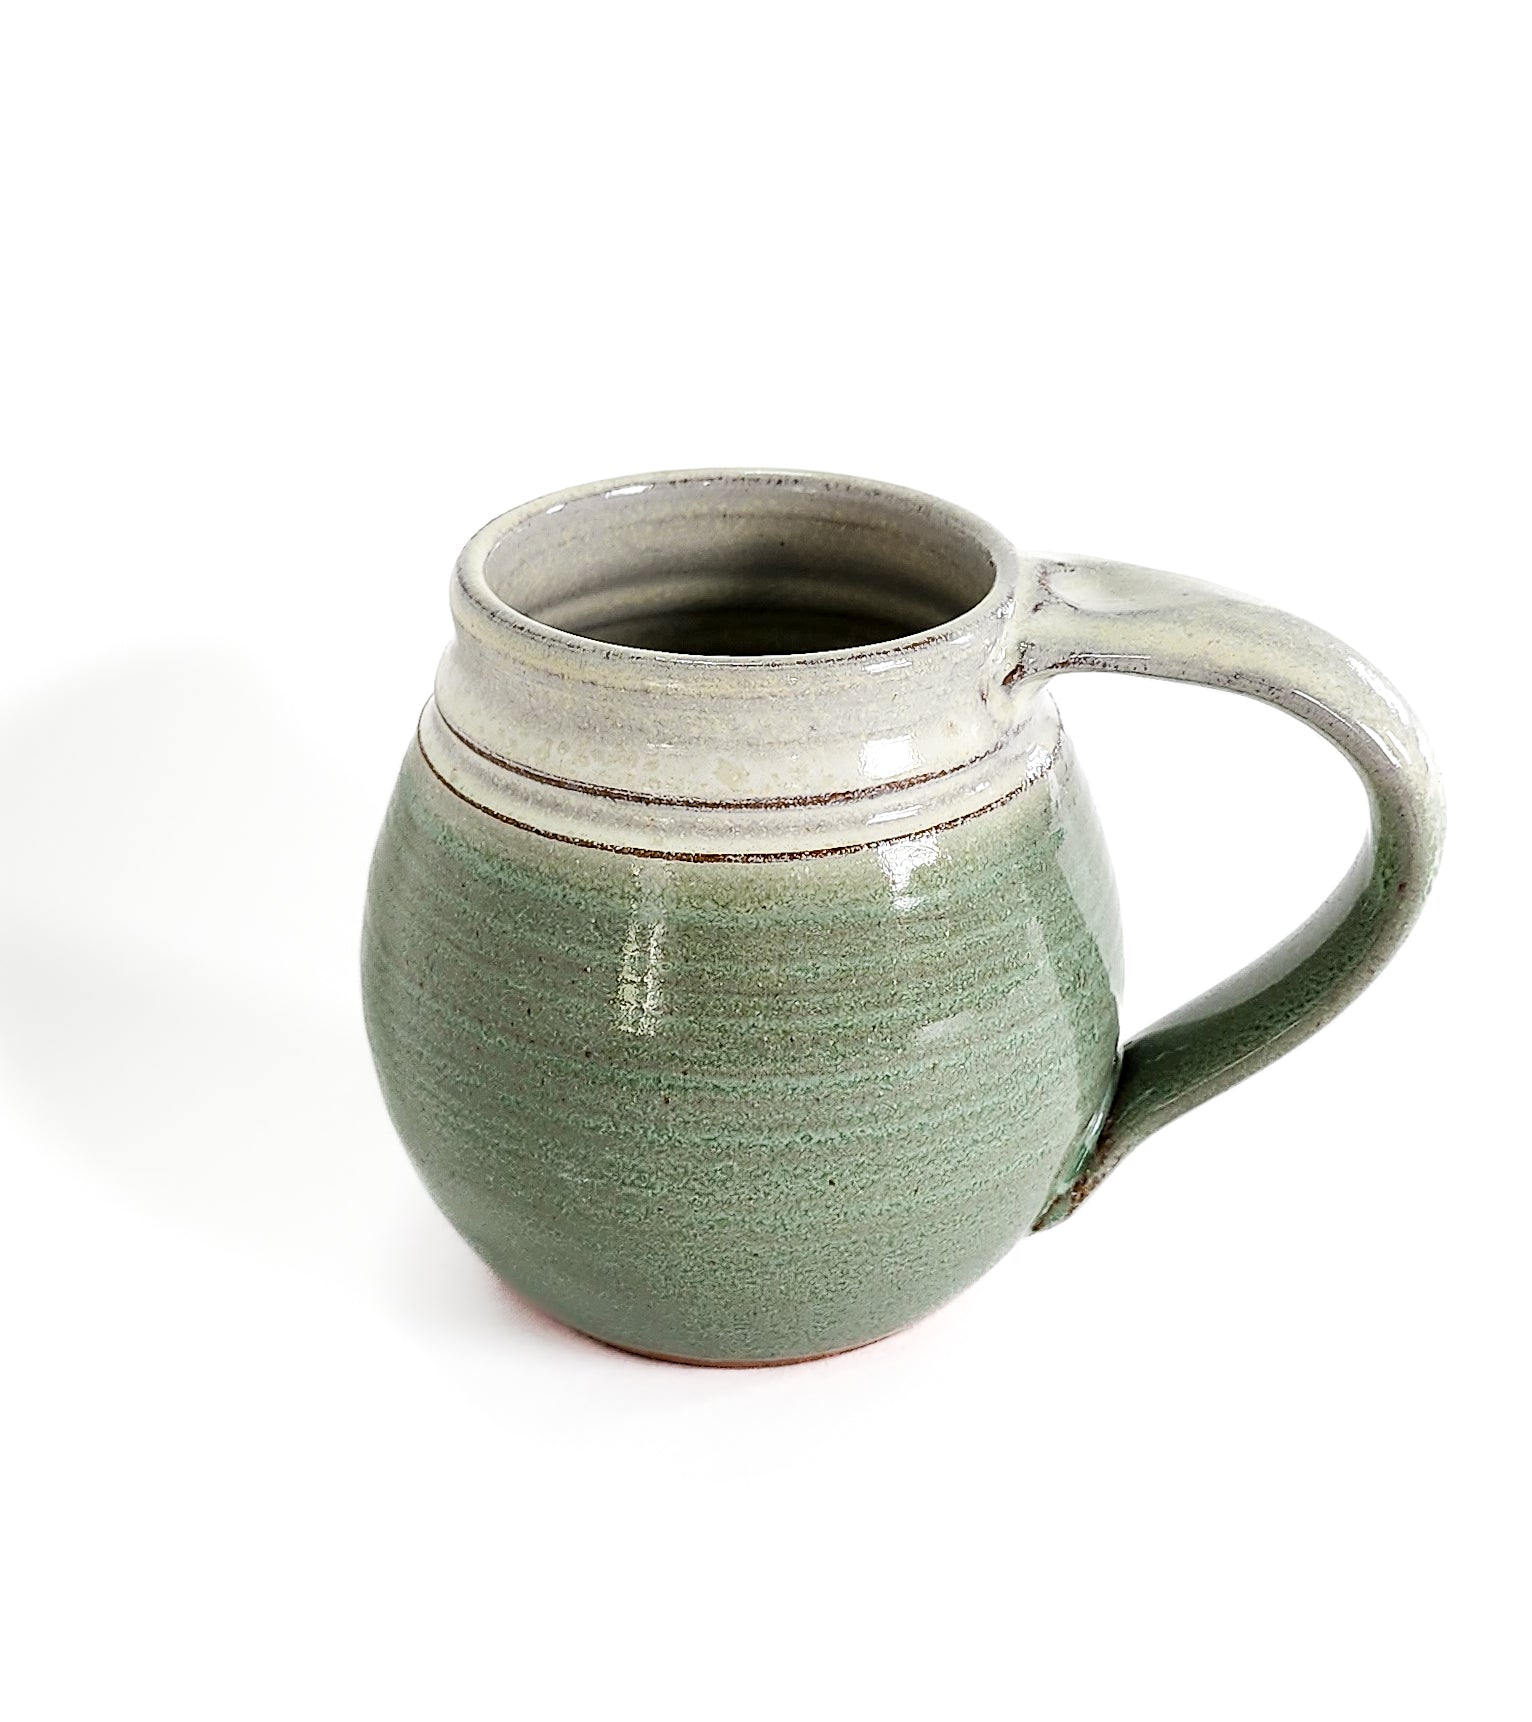 Image: Clinton Pottery's Handmade Medium Mug in Light Green – A refreshing and versatile 14-16 oz mug, expertly crafted. This Light Green piece adds a touch of natural vibrancy to your daily beverage routine, reminiscent of spring foliage and rejuvenation. 